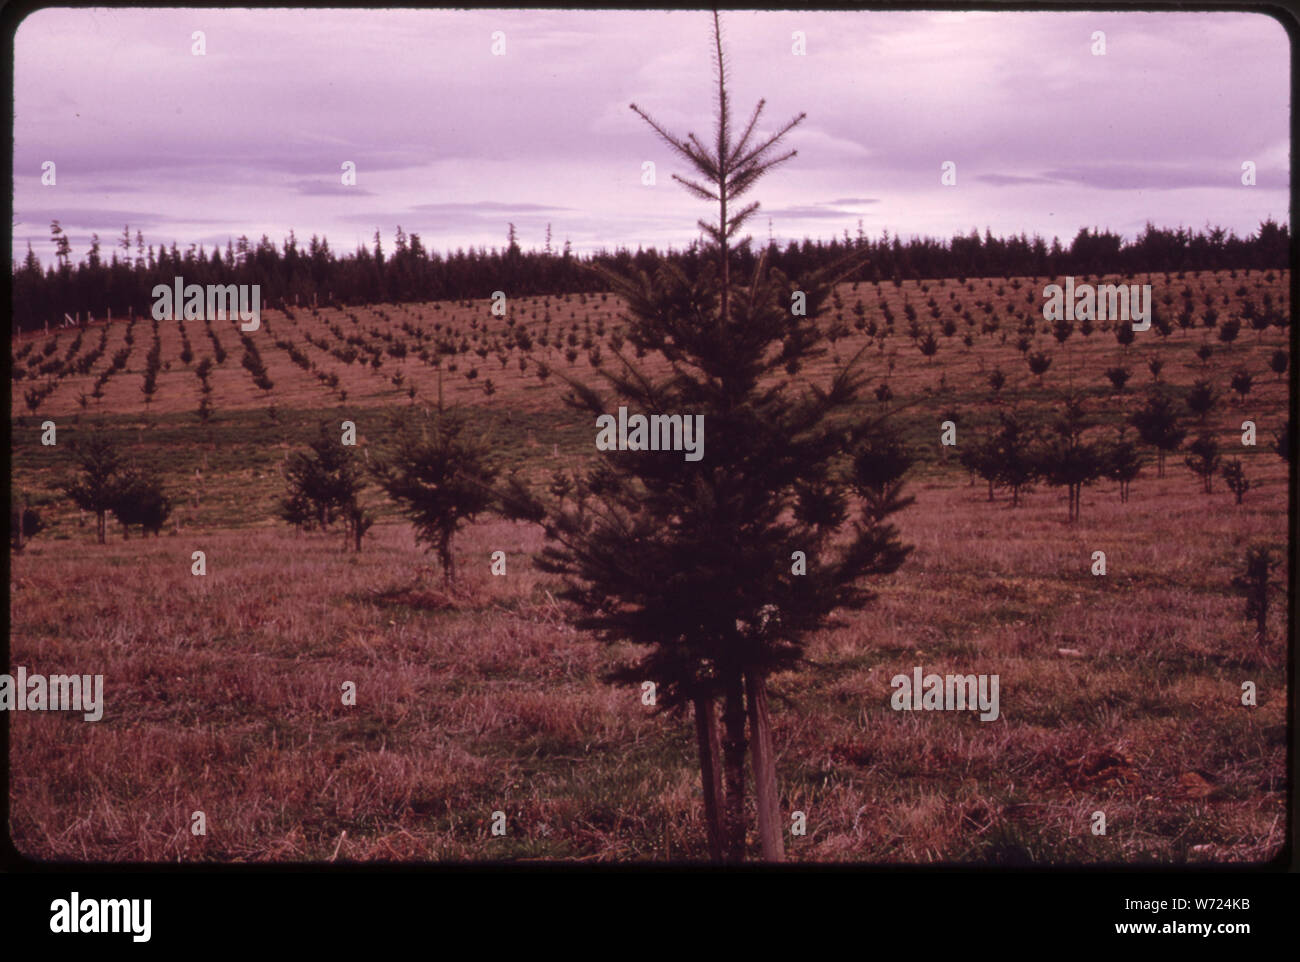 DENNIE AHL SEED ORCHARD STARTED IN 1956. THE 17-YEAR-OLD DOUGLAS FIR TREES ARE LOCATED IN OLYMPIC NATIONAL TIMBERLAND WASHINGTON. NEAR OLYMPIC NATIONAL PARK Stock Photo